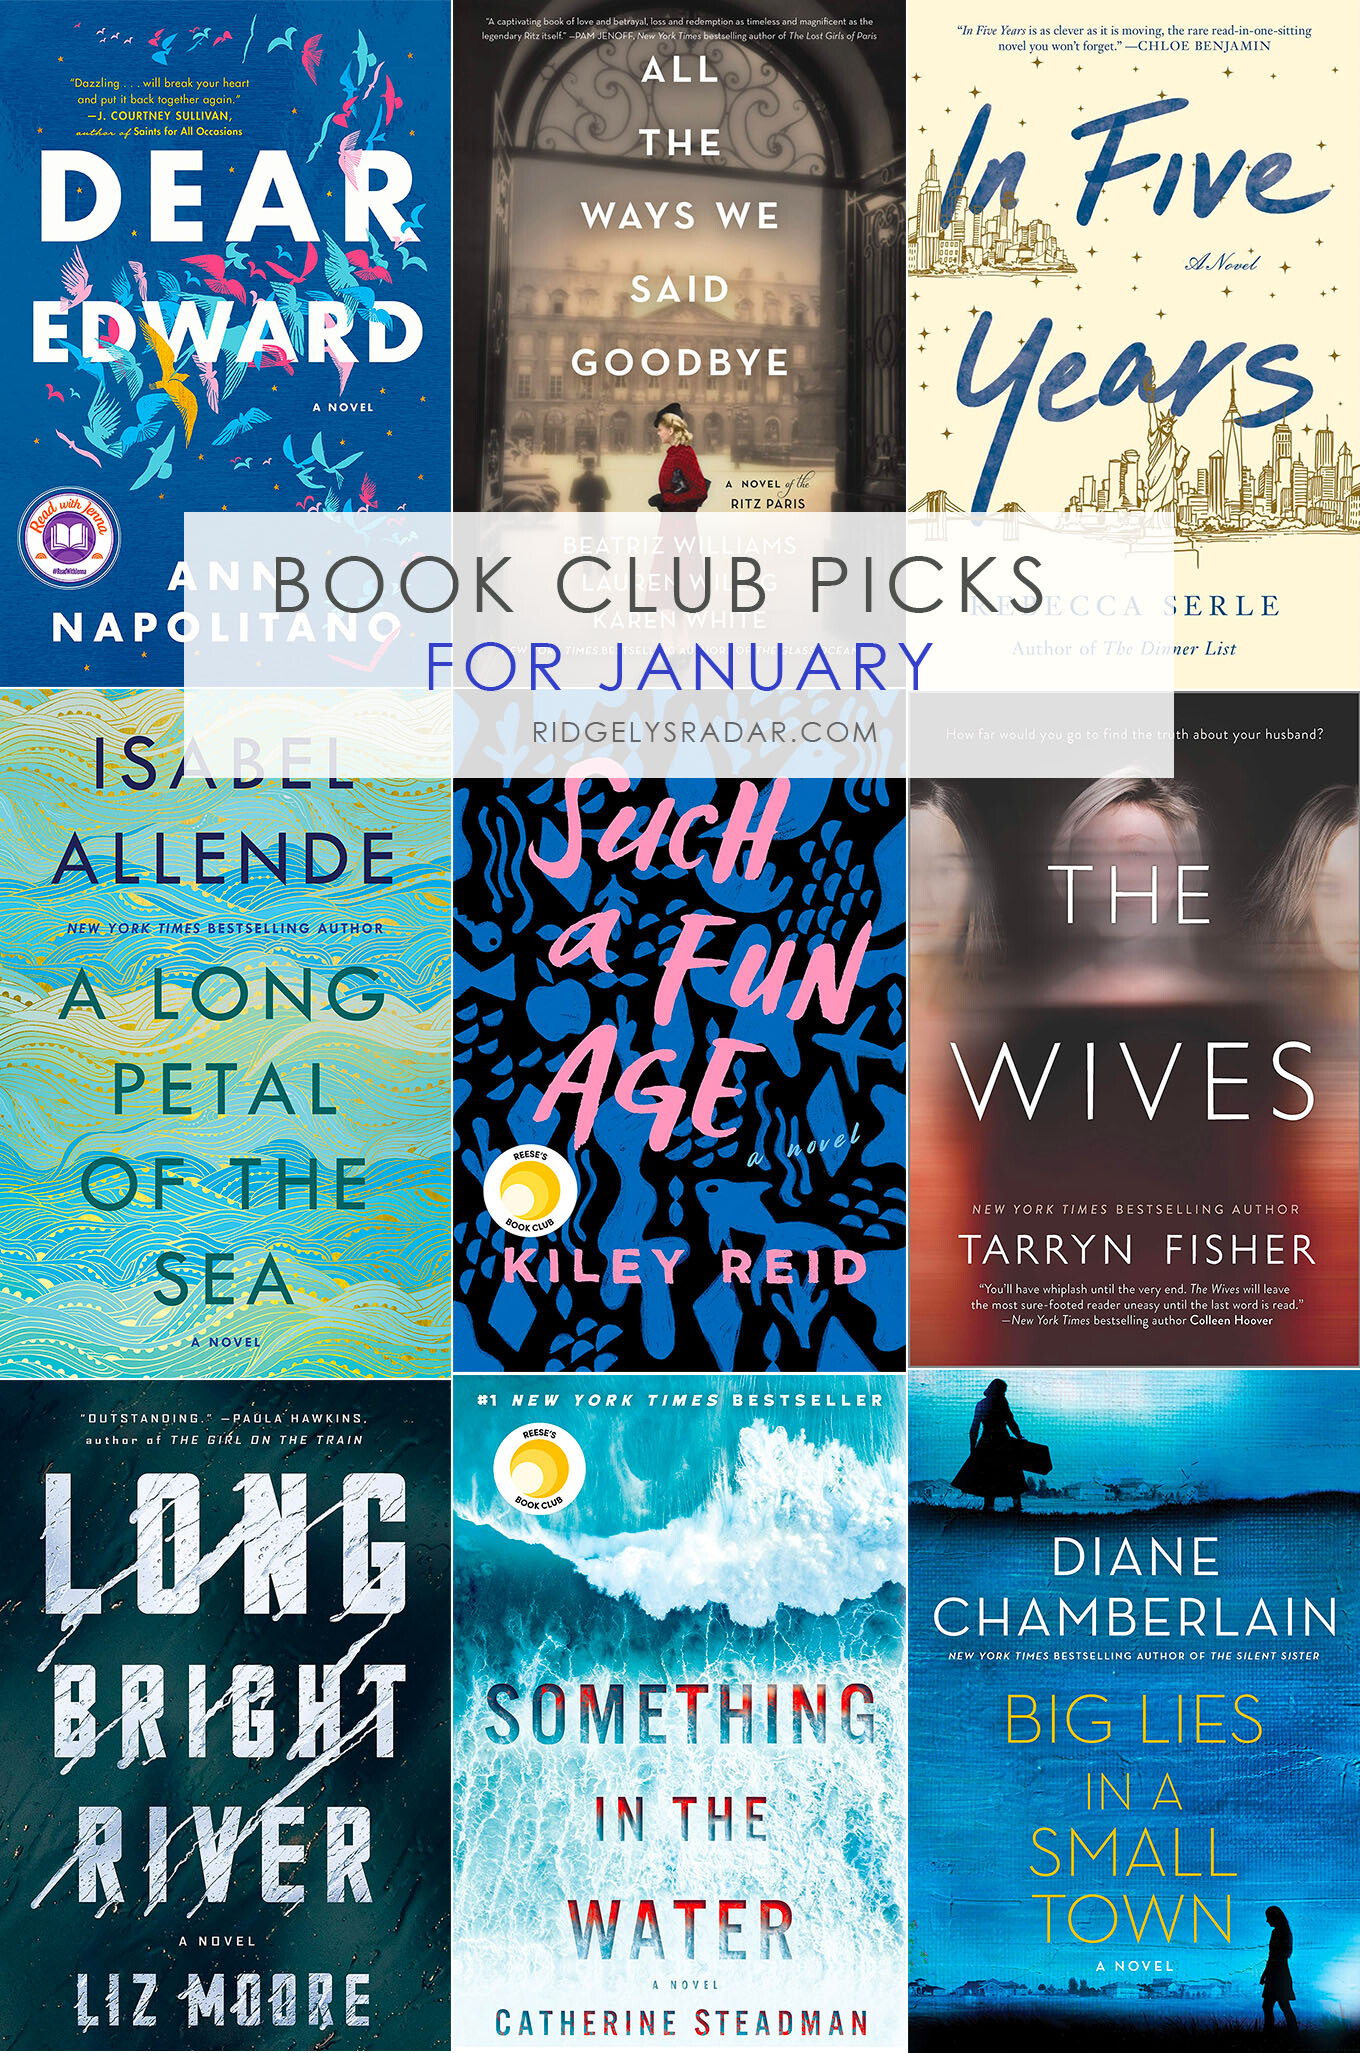 Don't miss out on these books for your January Book Club! New releases and hot selections from the best celebrity book clubs - you will want to read them!